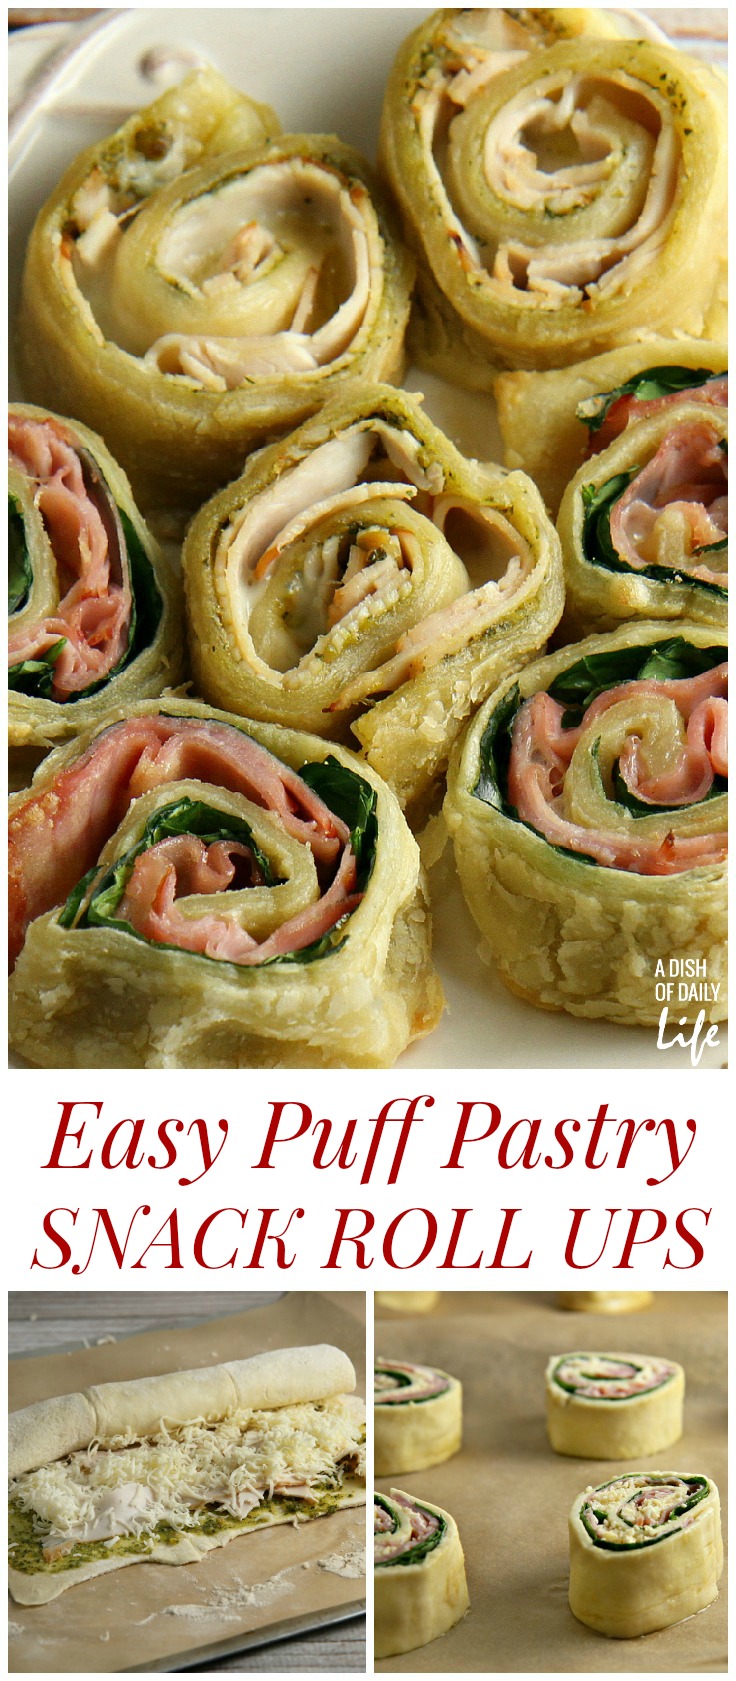 Crazy schedule? This Puff Pastry Snack Roll Up recipe is a delicious and easy after school snack for busy families on the go!